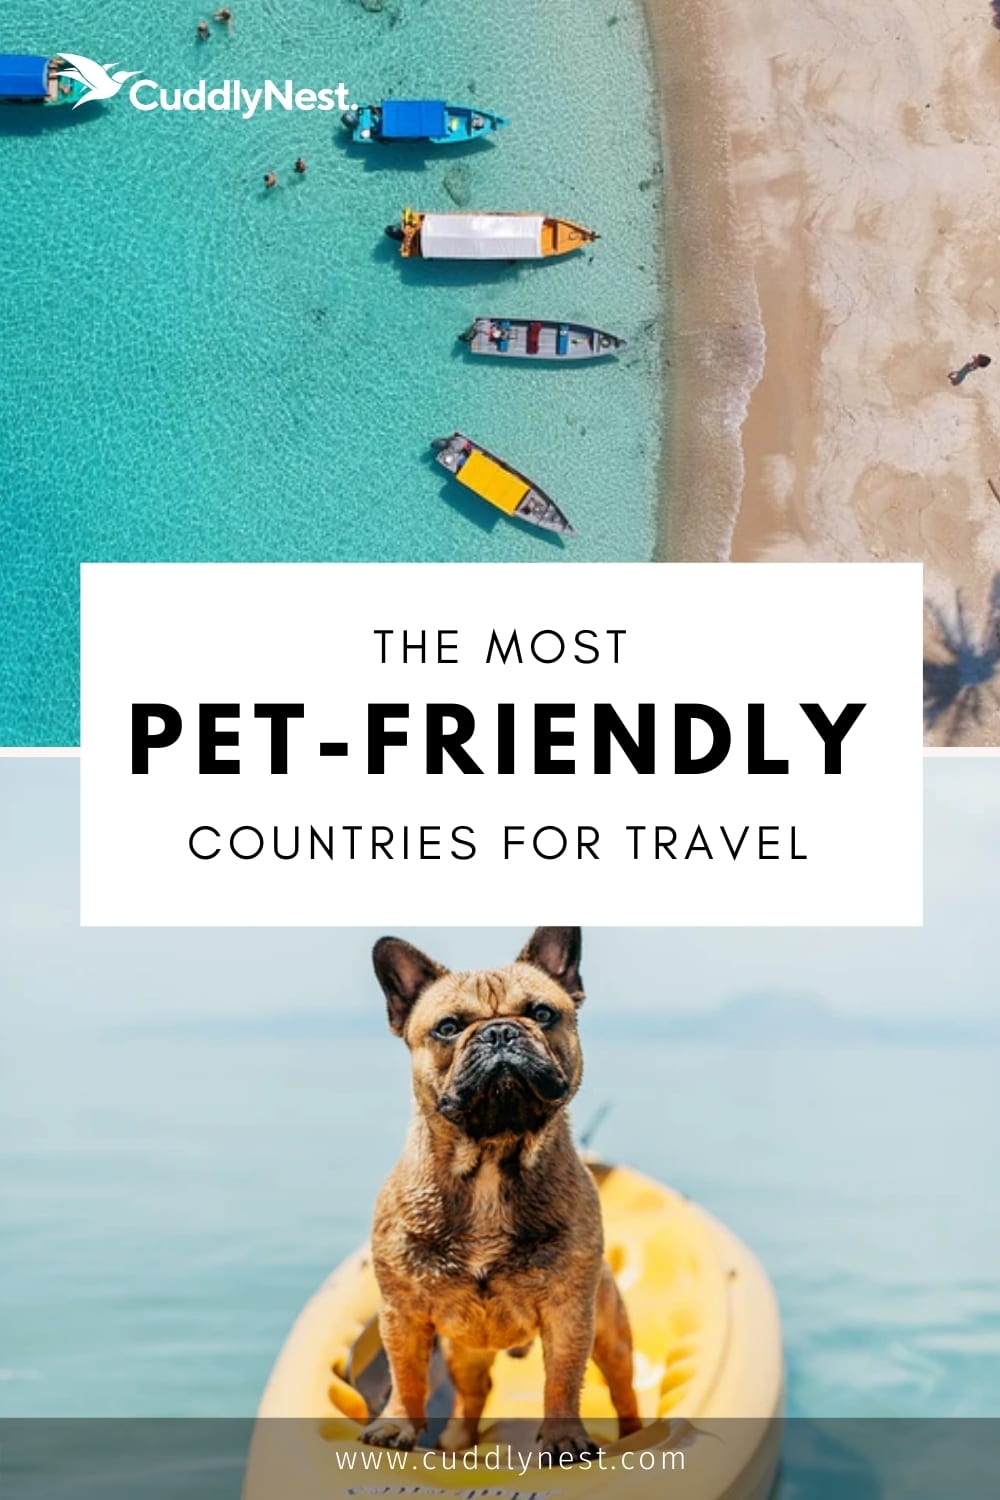 Travel The Country With Your Dog In This Customized Pet-Friendly